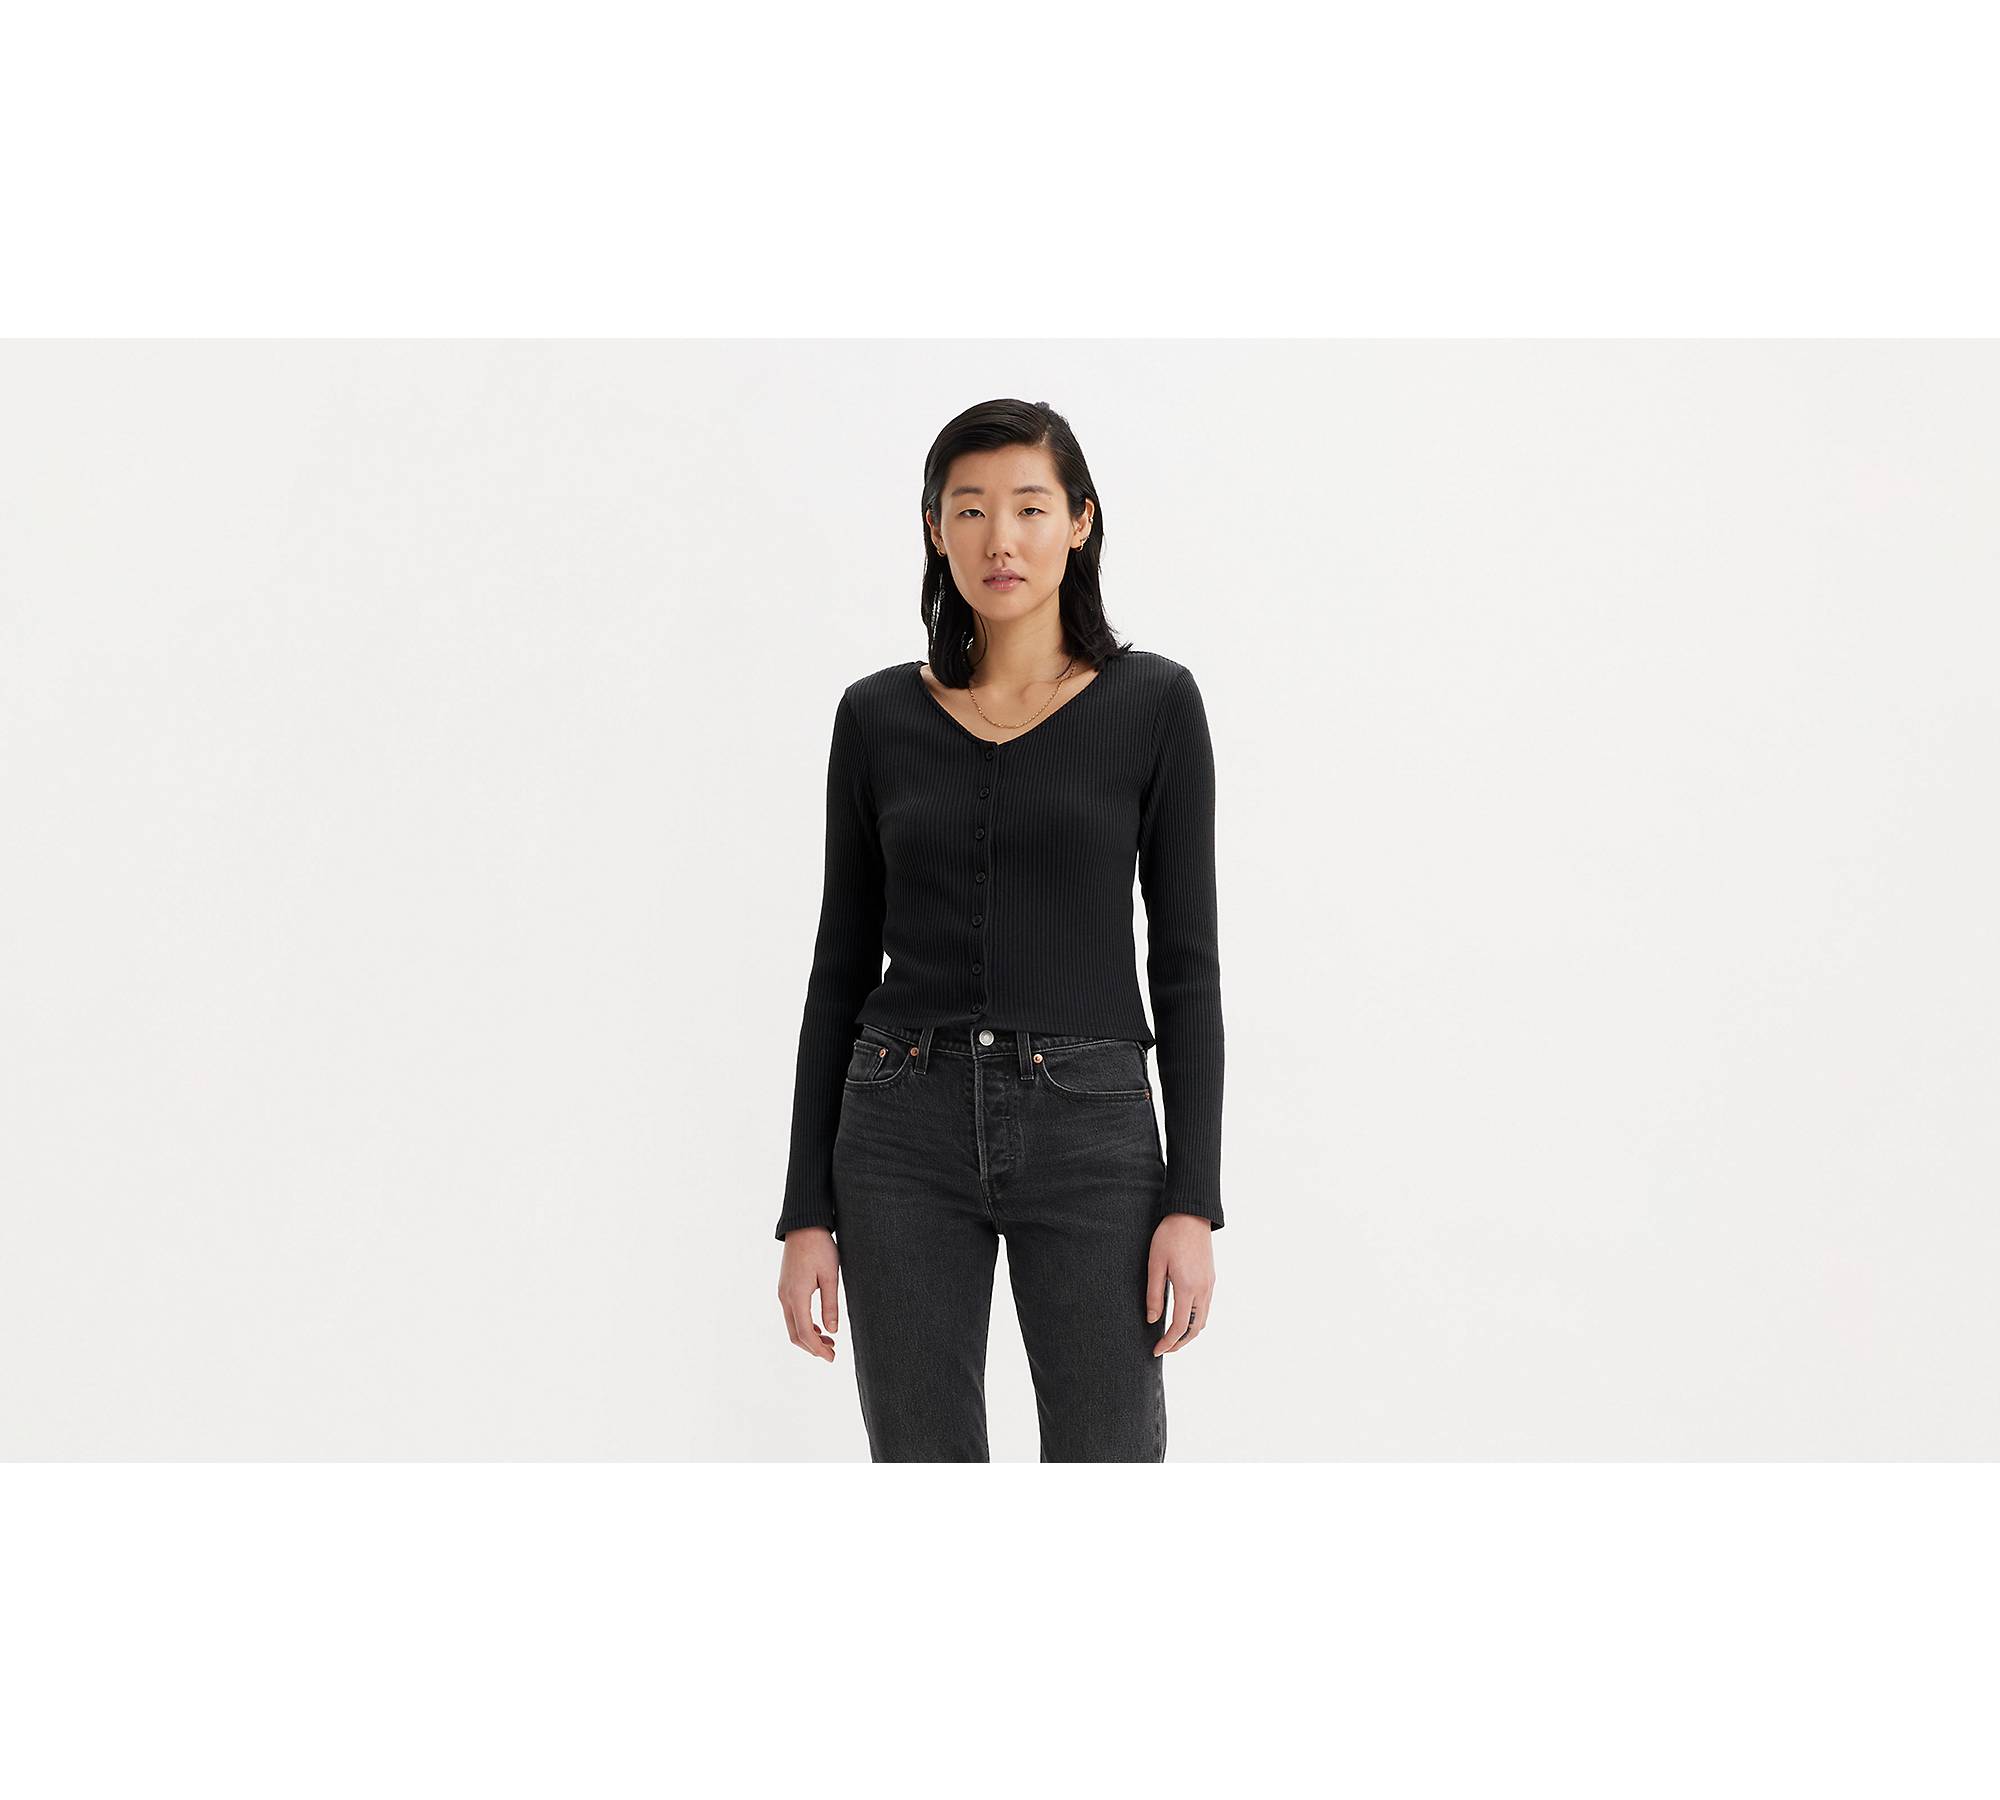 Cotton On Body LIGHTWEIGHT CROPPED LONG SLEEVE - Long sleeved top - black 